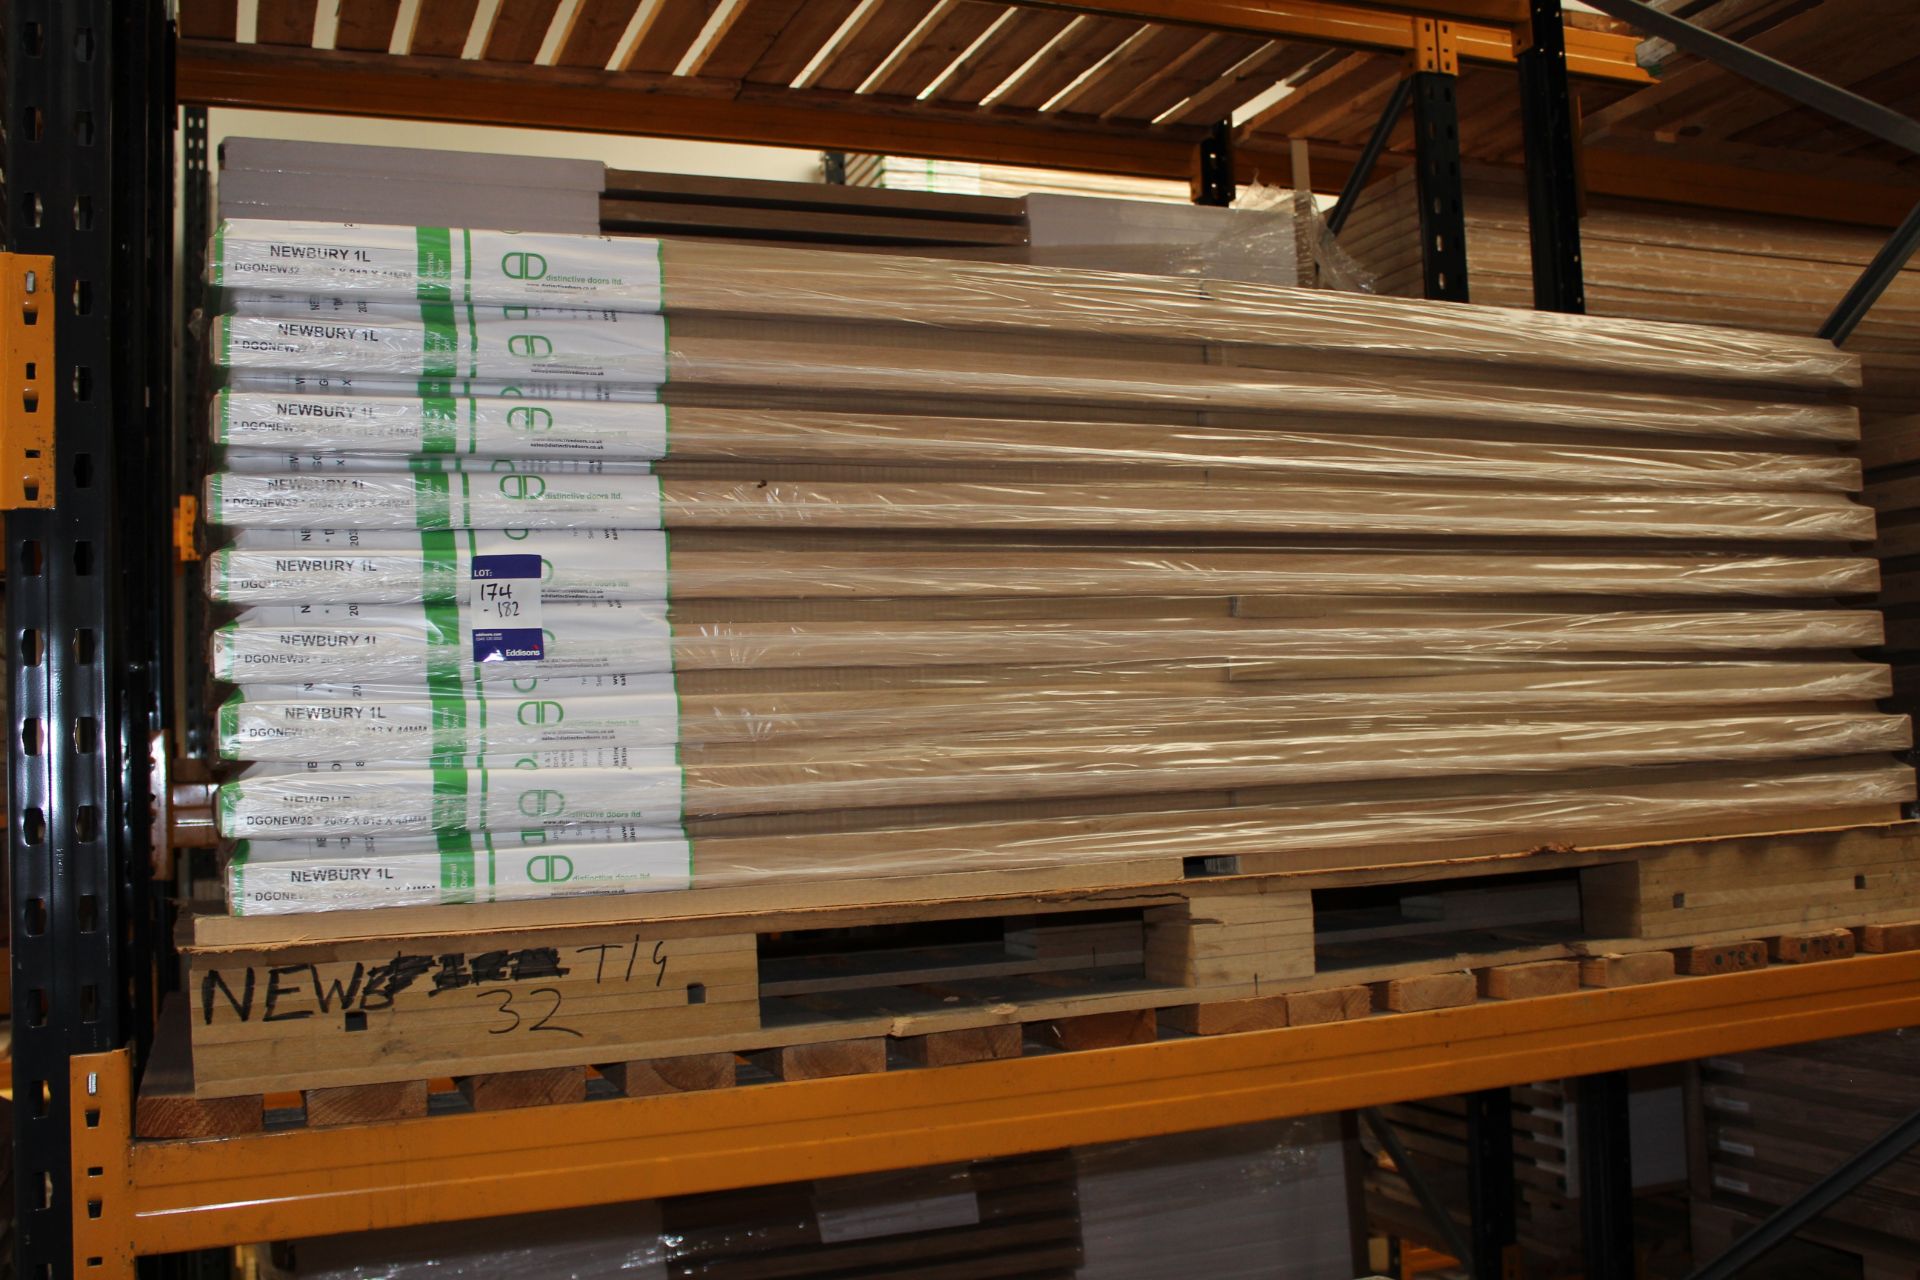 Newbury 1L External Door, 2032mm x 813mm x 44mm - Lots to be handed out in order they are stacked, - Image 2 of 3